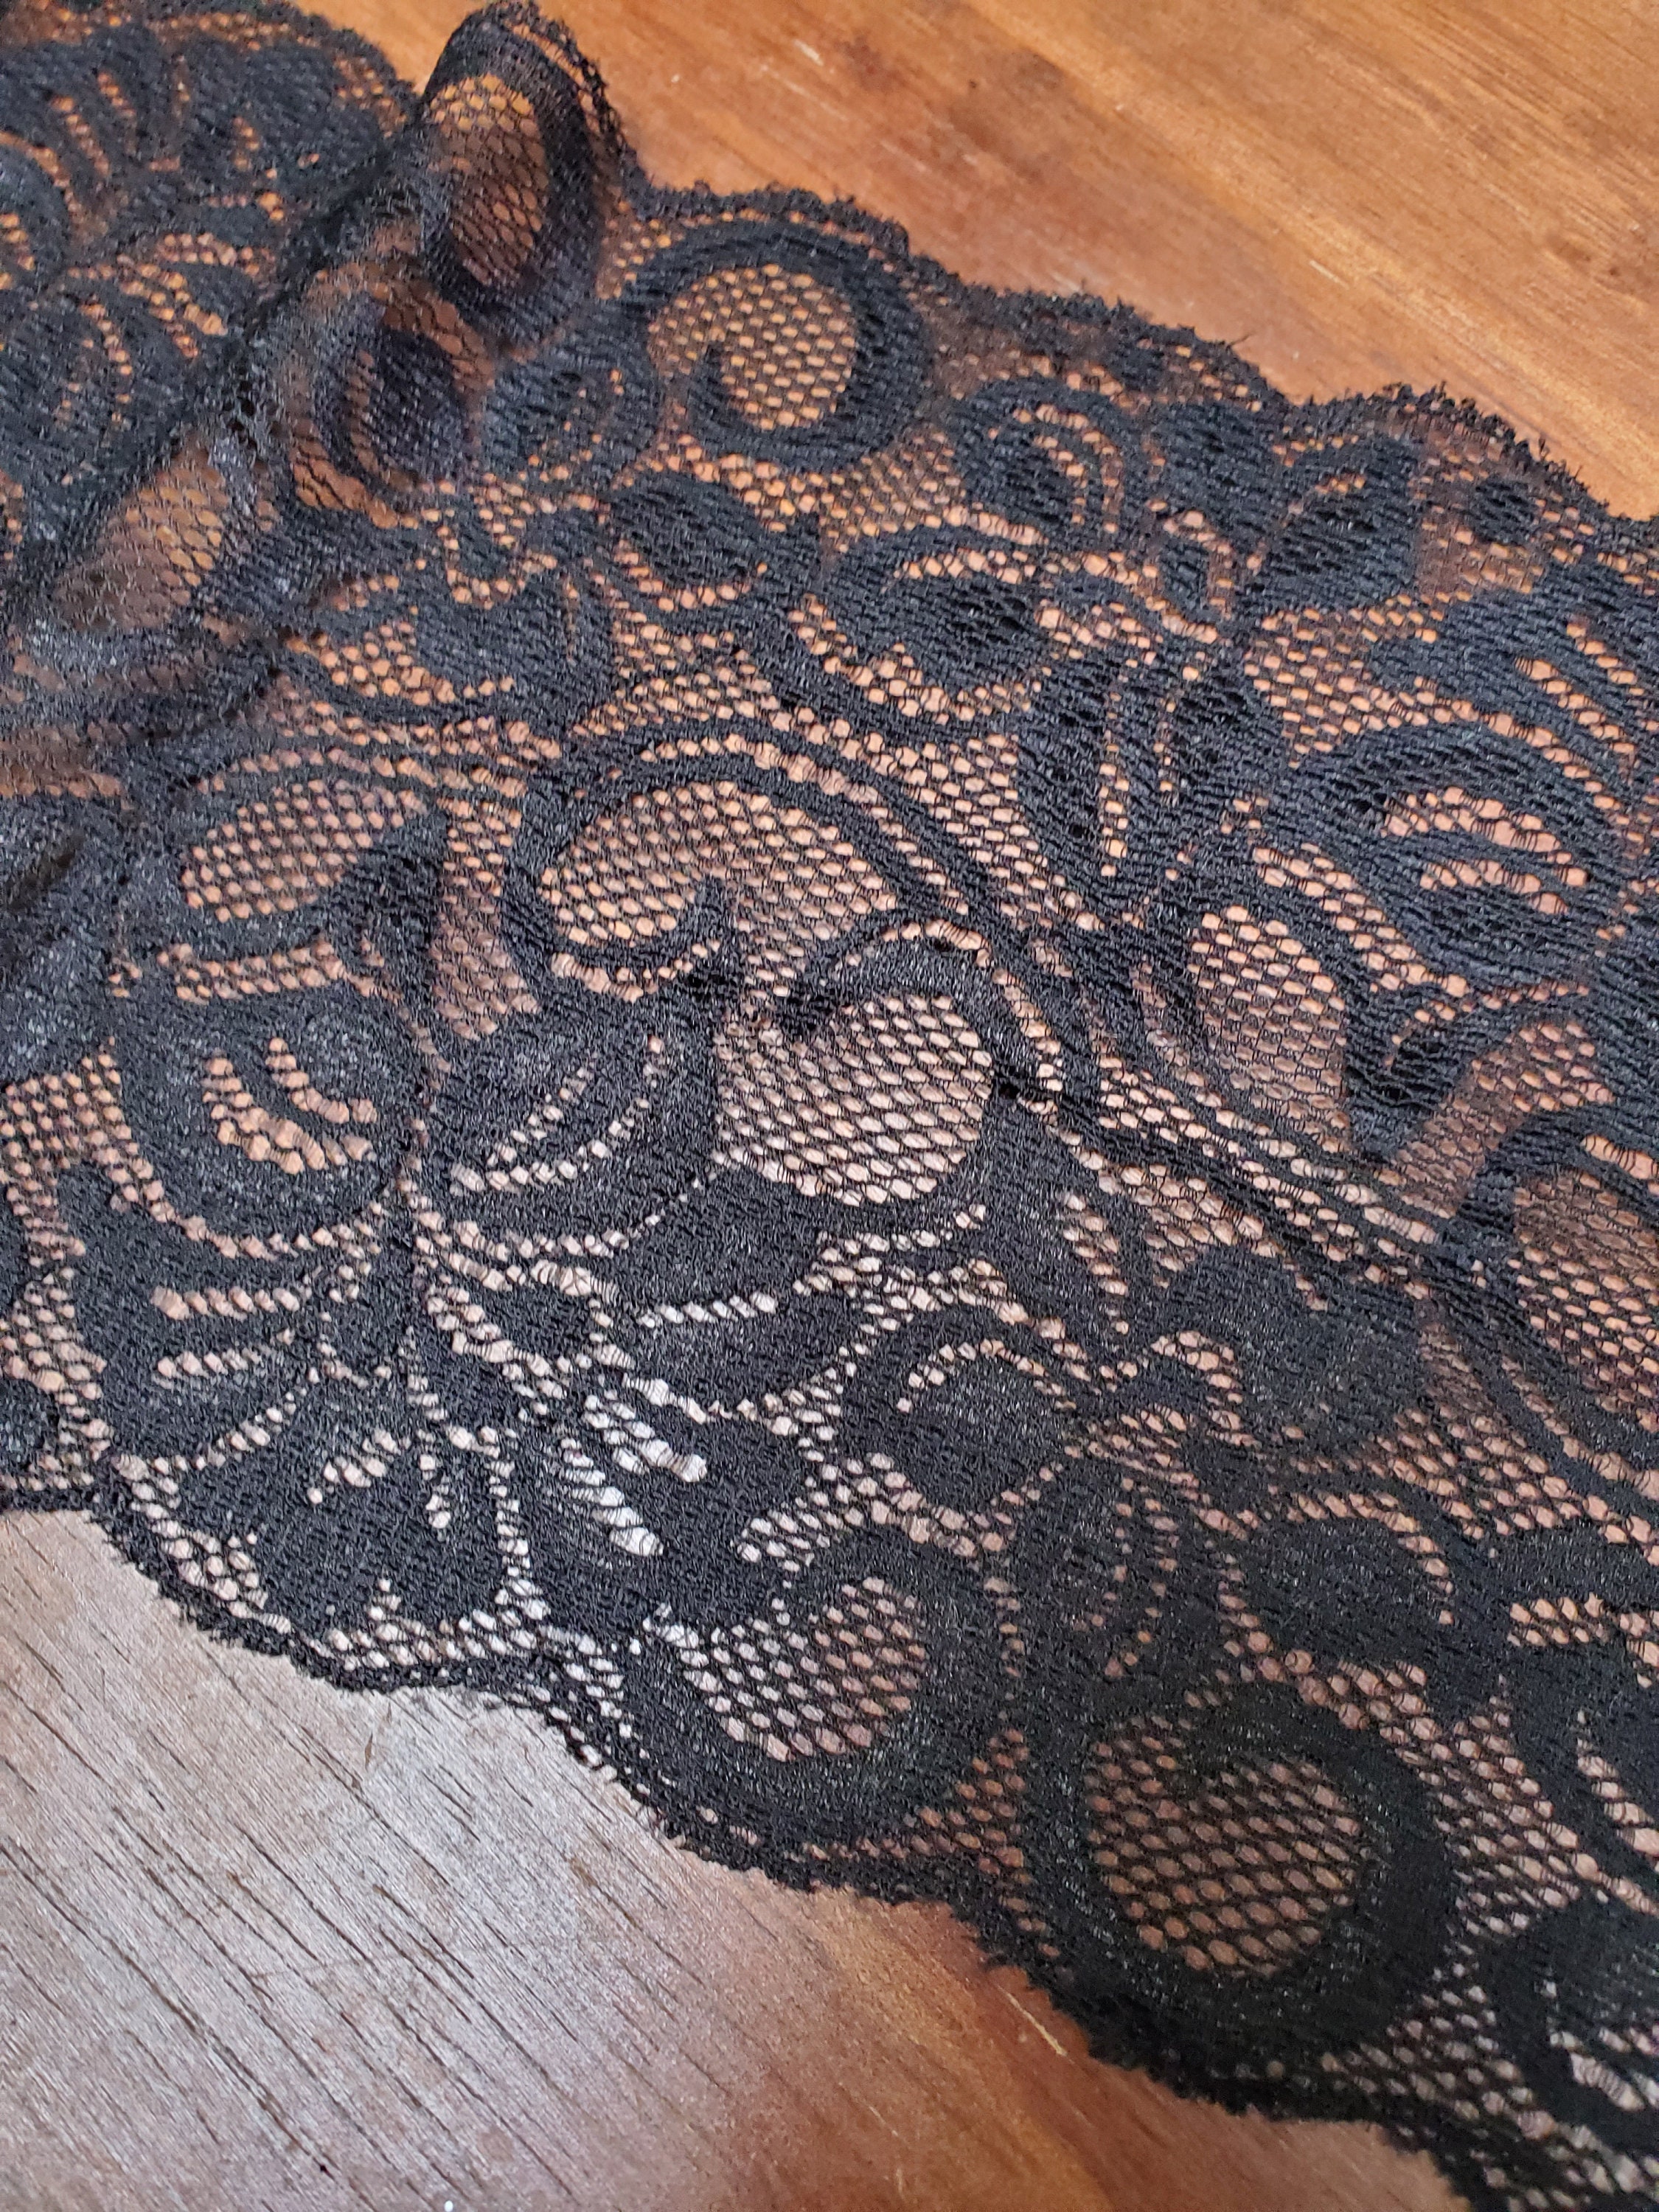 Black Stretch Lace Galloon Scalloped by the Yard 5.5 Inch - Etsy